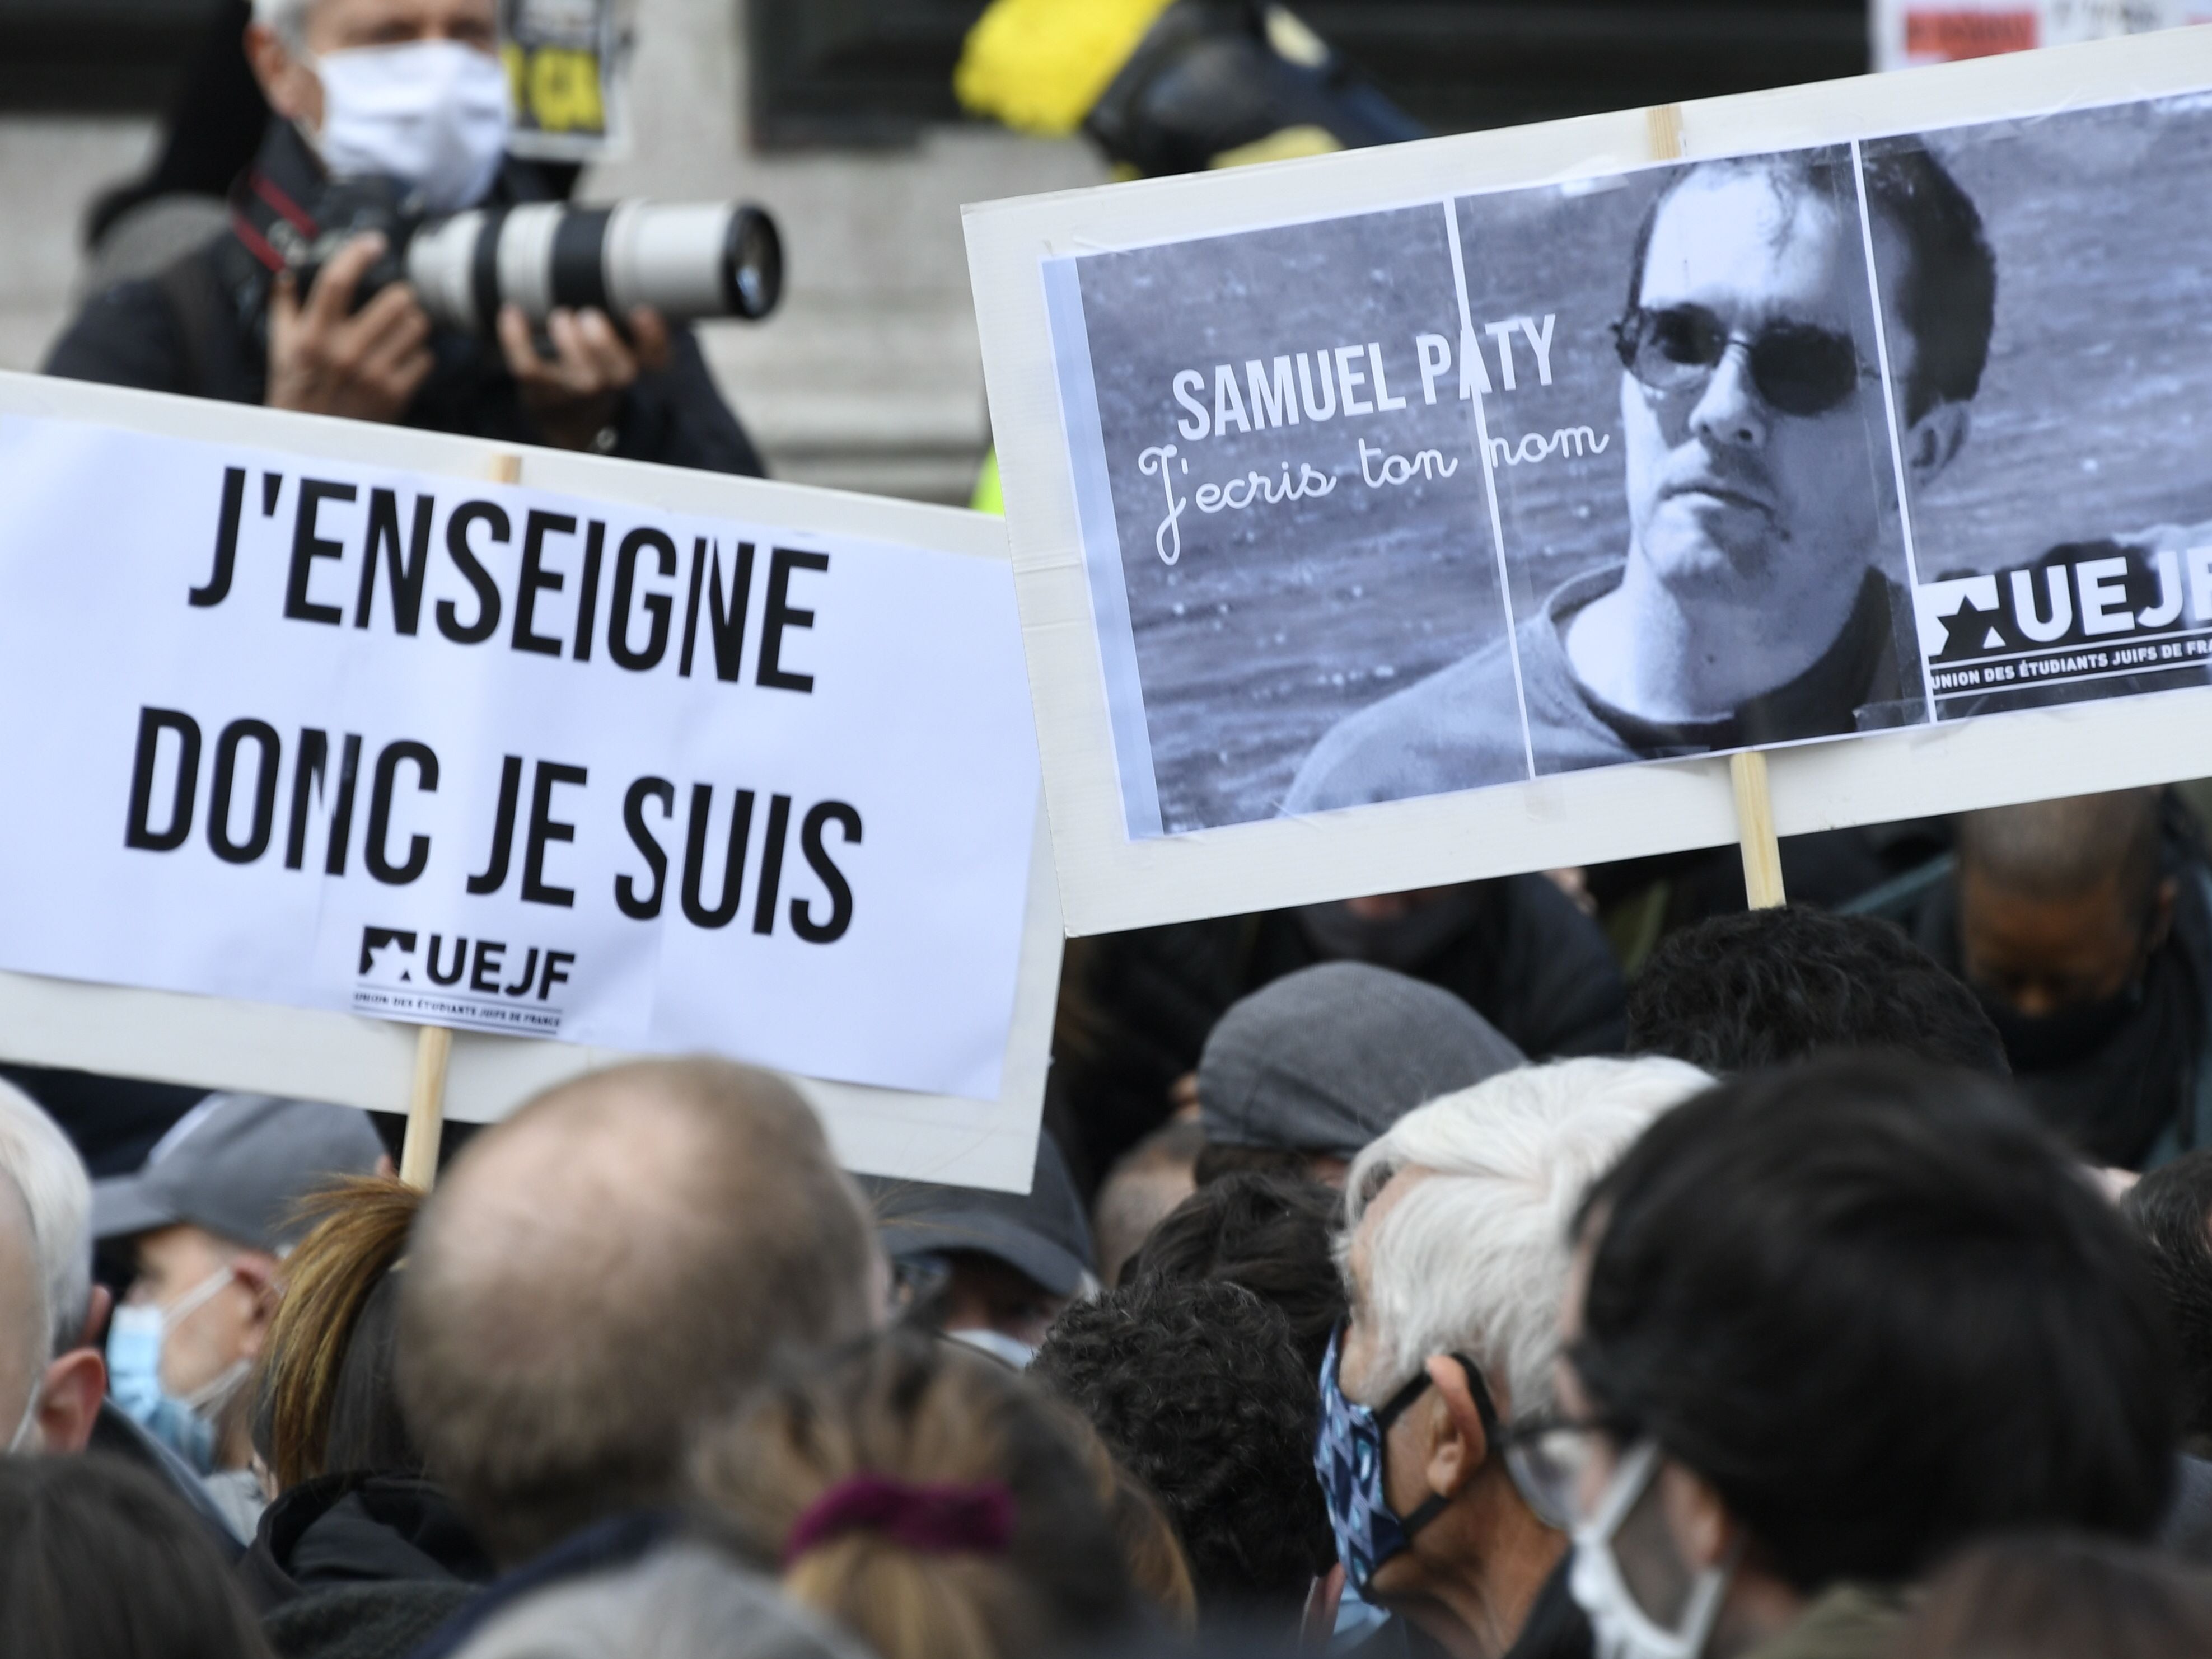 People have taken to the street in France in a show of solidarity and defiance following the beheading of Samuel Paty